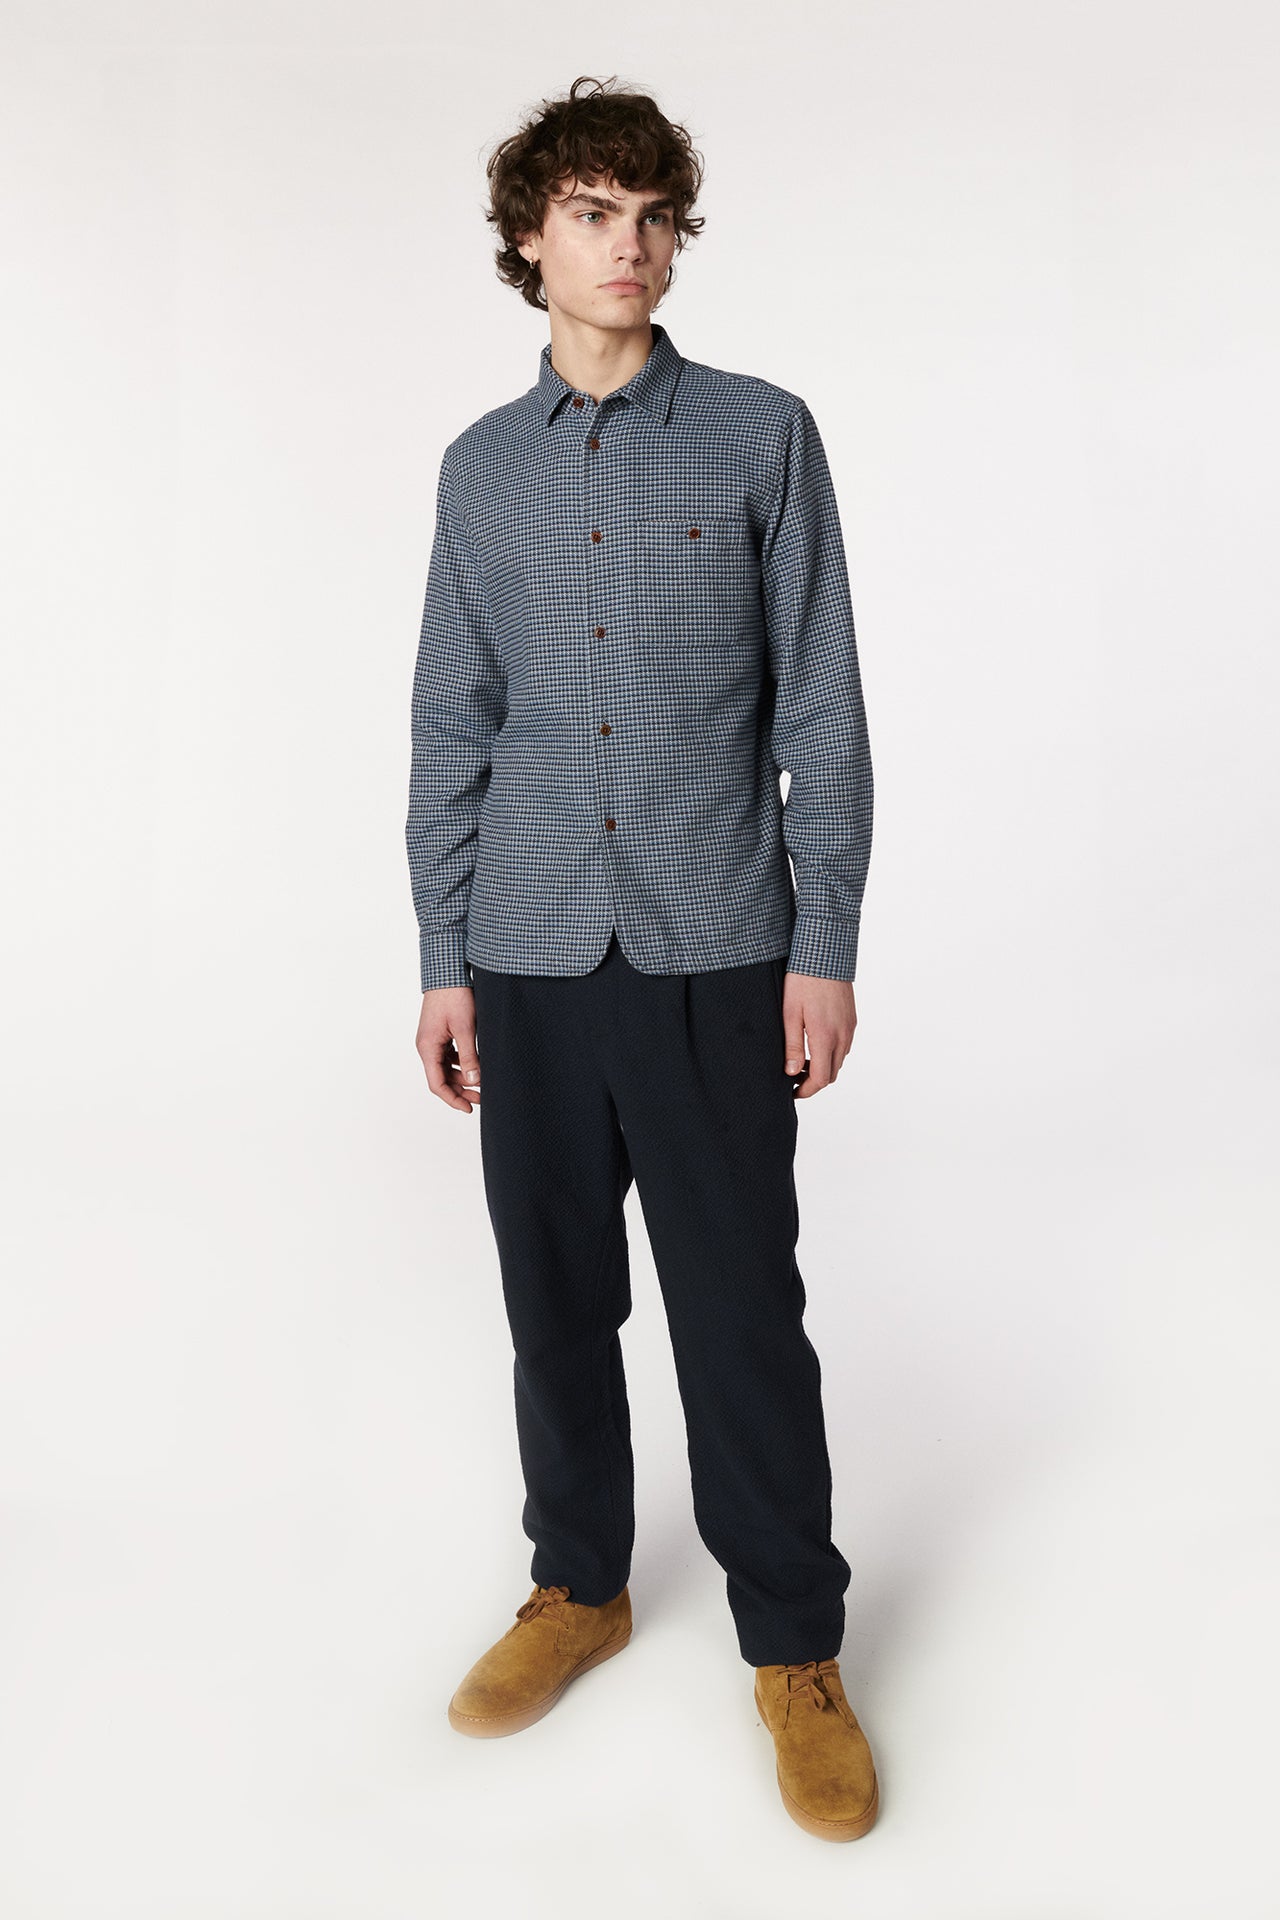 Strong Shirt in a Refreshing Mix of Dark and Light Blue Checkered Portuguese Cotton Flannel